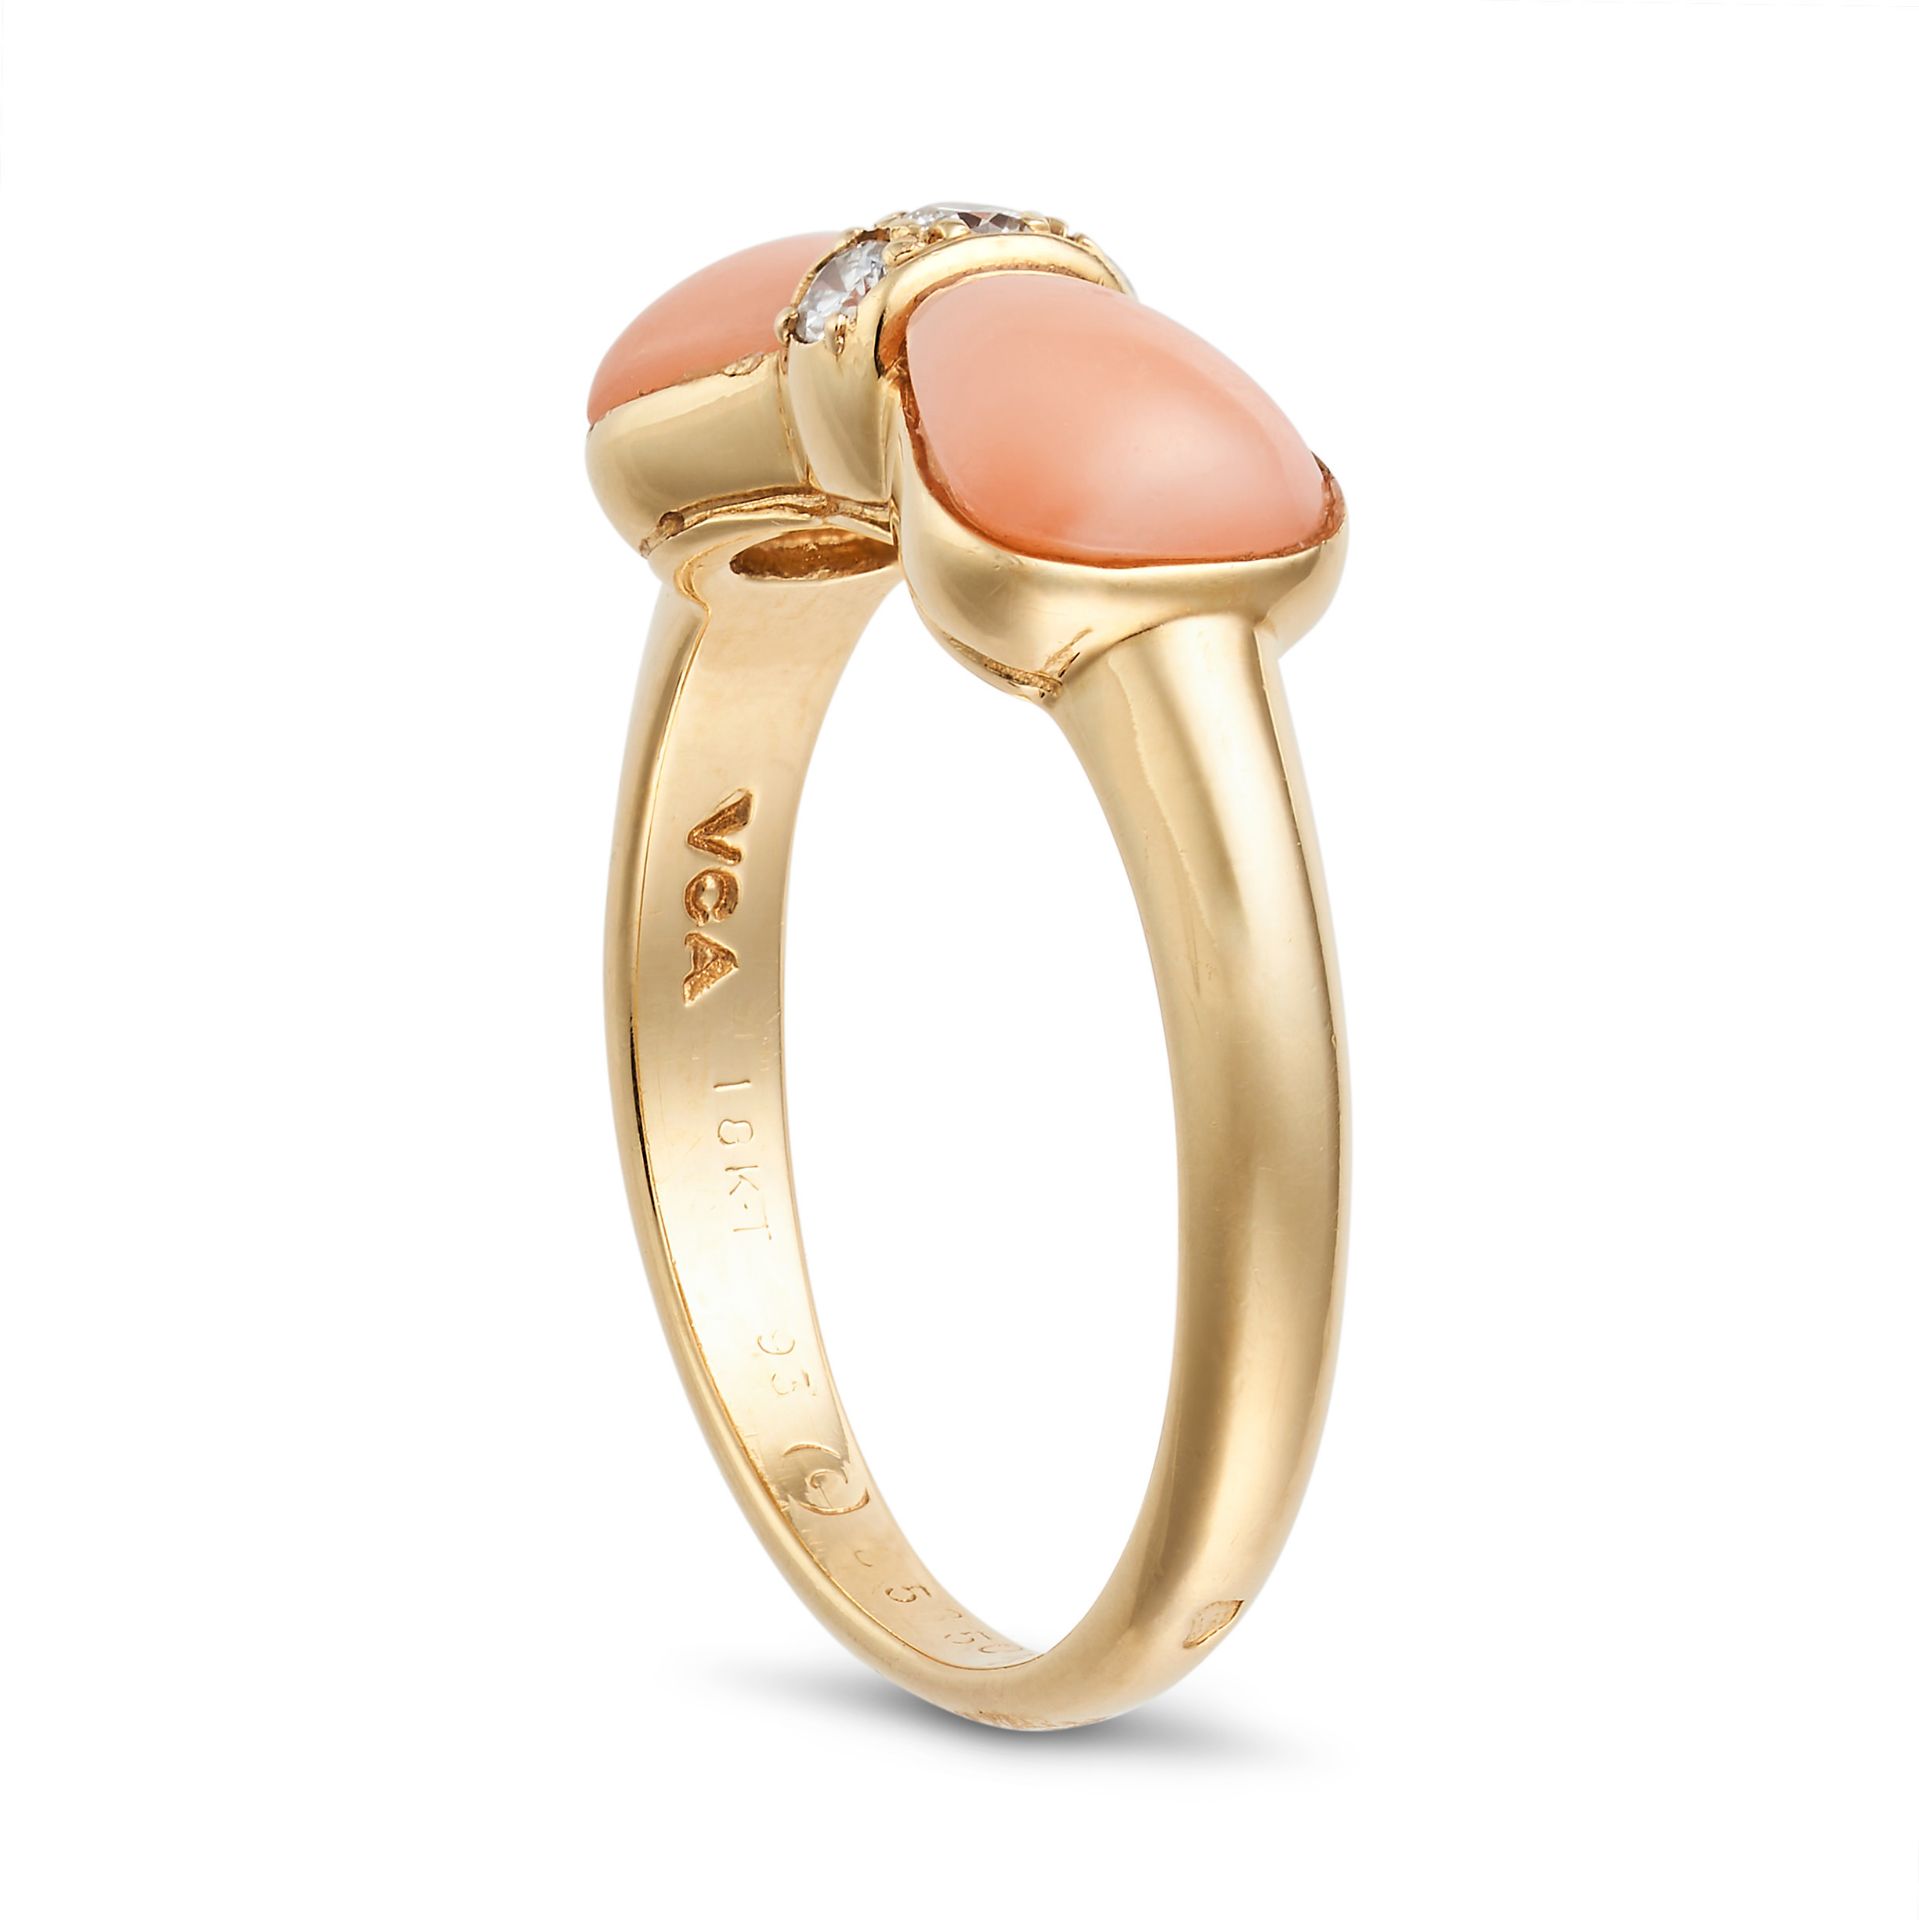 VAN CLEEF & ARPELS, A CORAL AND DIAMOND BOW RING in 18ct yellow gold, designed as a bow set with ... - Bild 2 aus 2